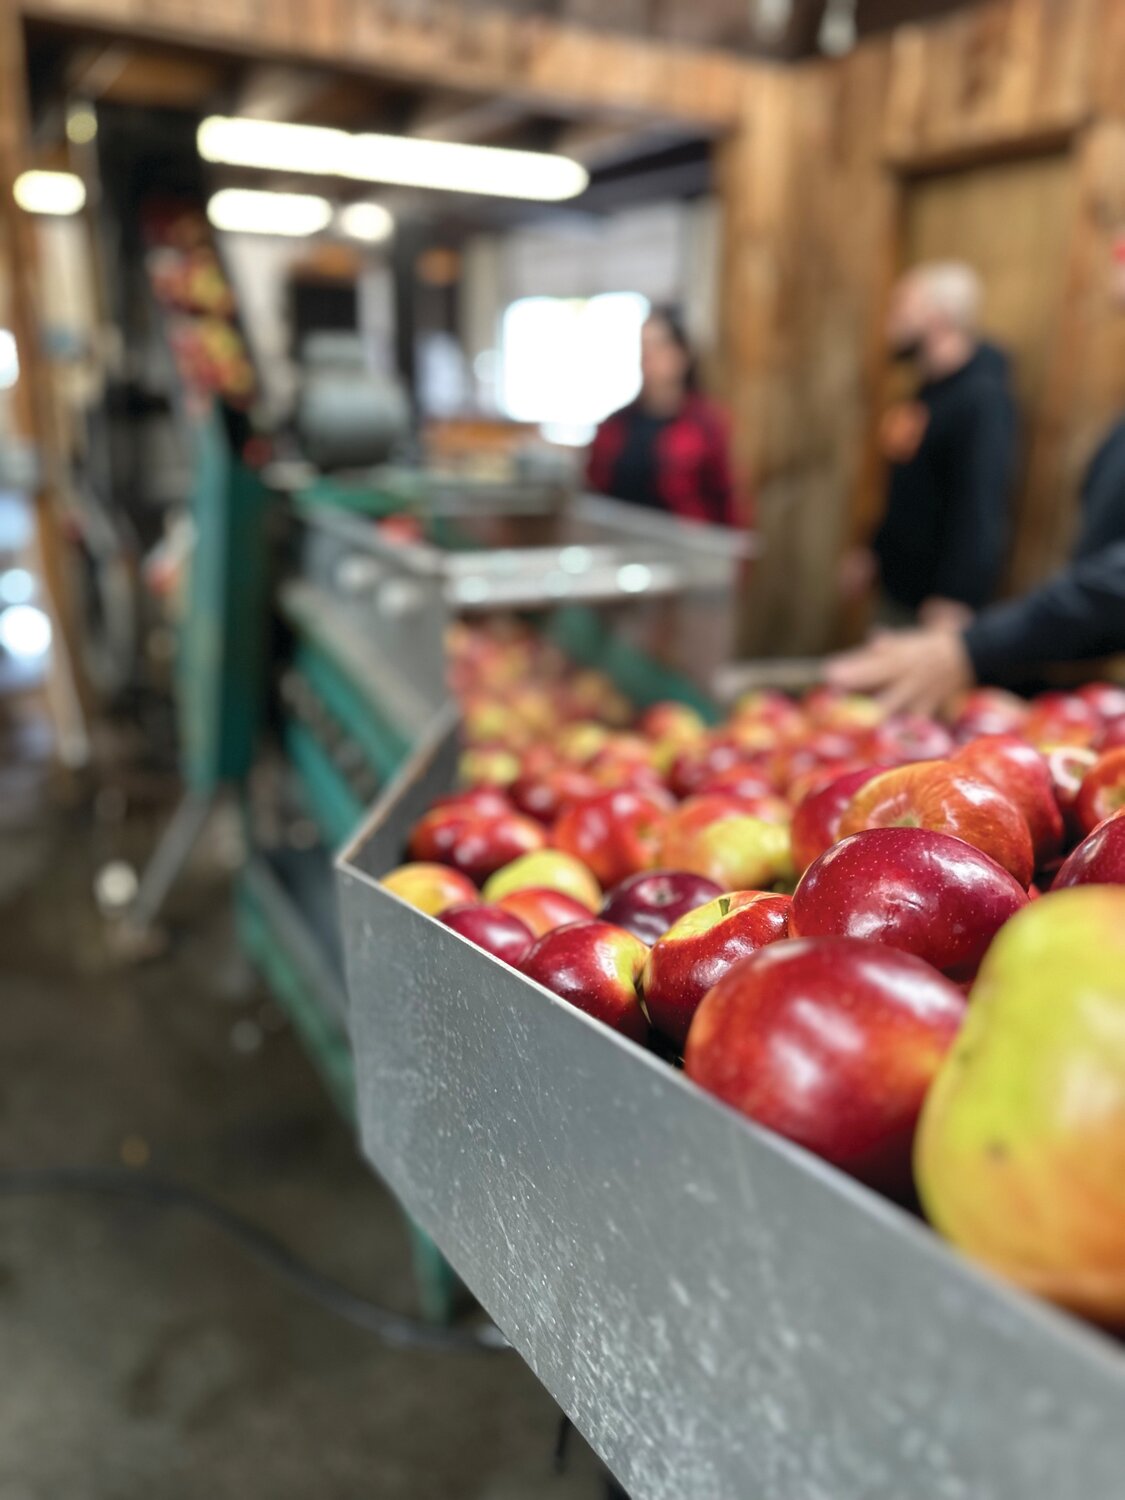 STOP THE PRESSES: The Shields family took ownership of Appleland in April and the former owners, the D’Andrea family, helped smooth the transition. They helped press cider and pass on some of the orchard’s production secrets.